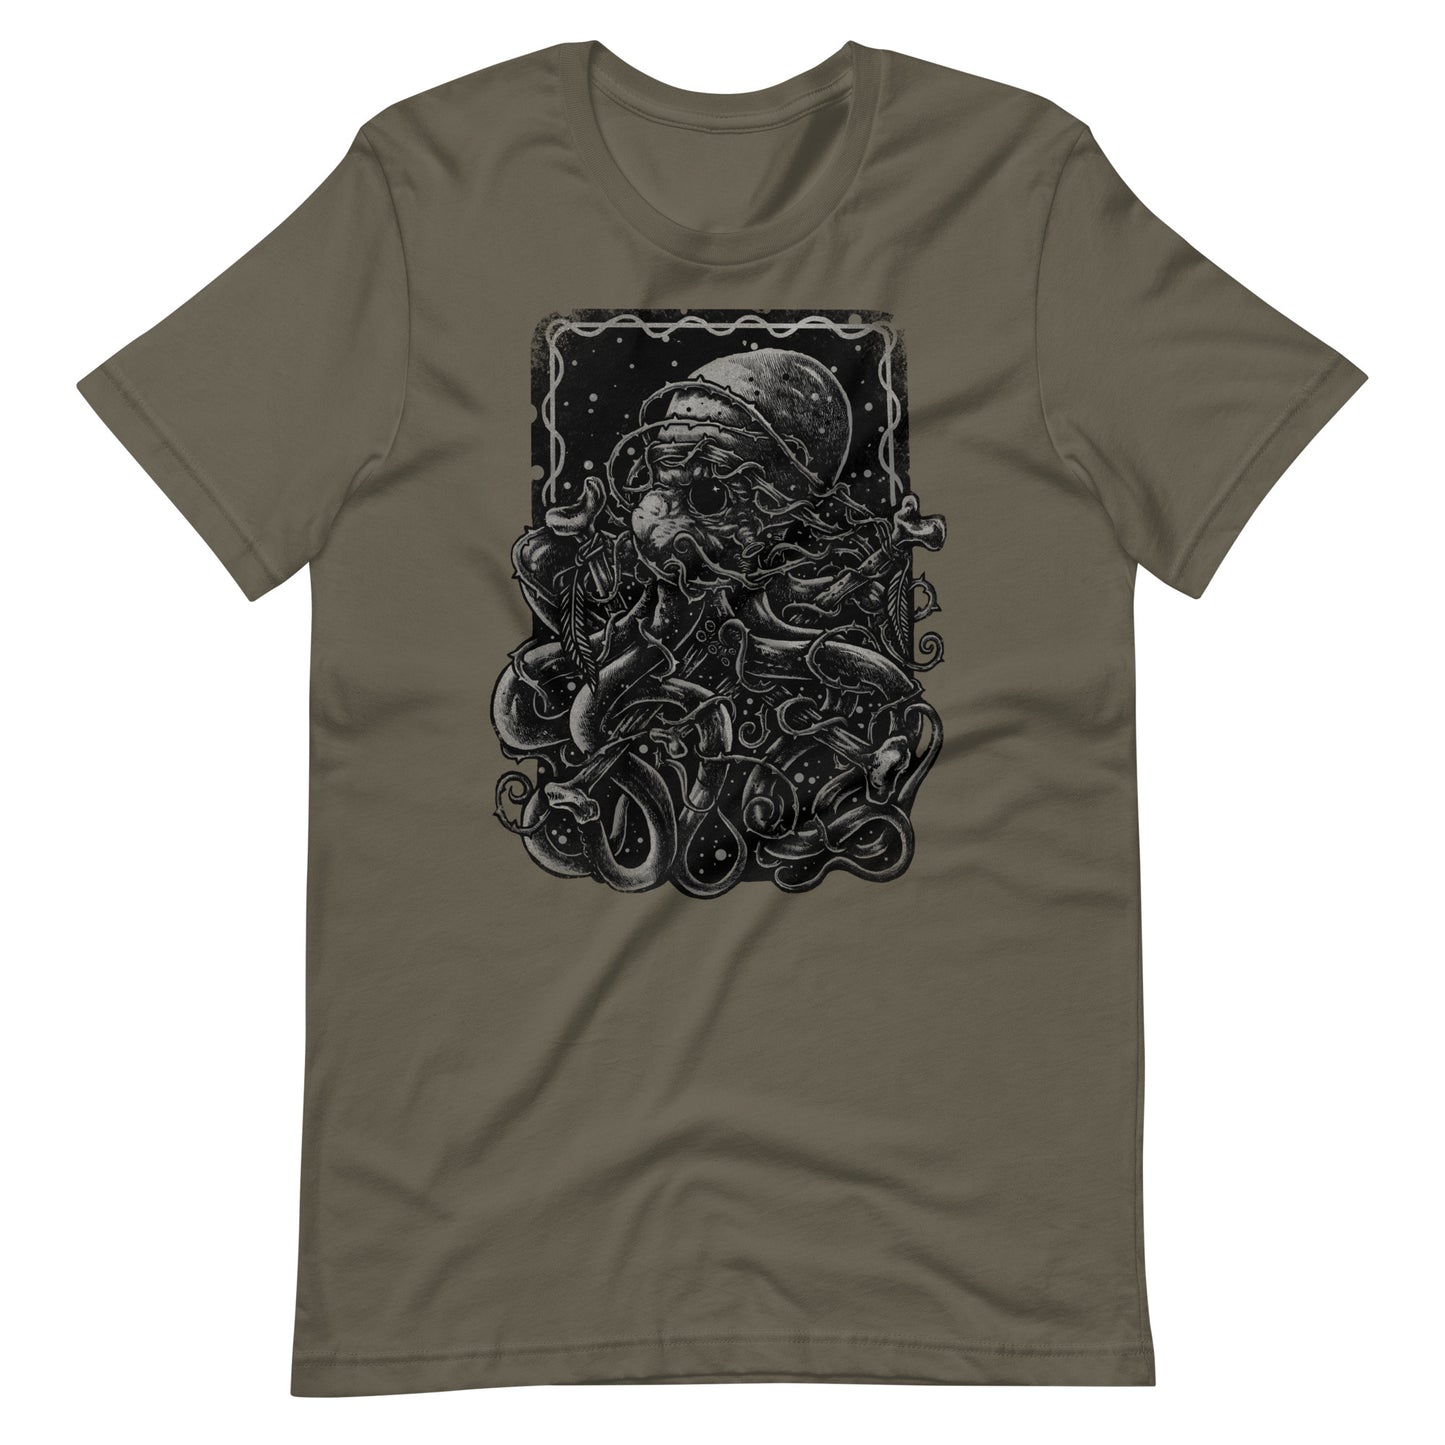 Spiny Octopus Black - Men's t-shirt - Army Front